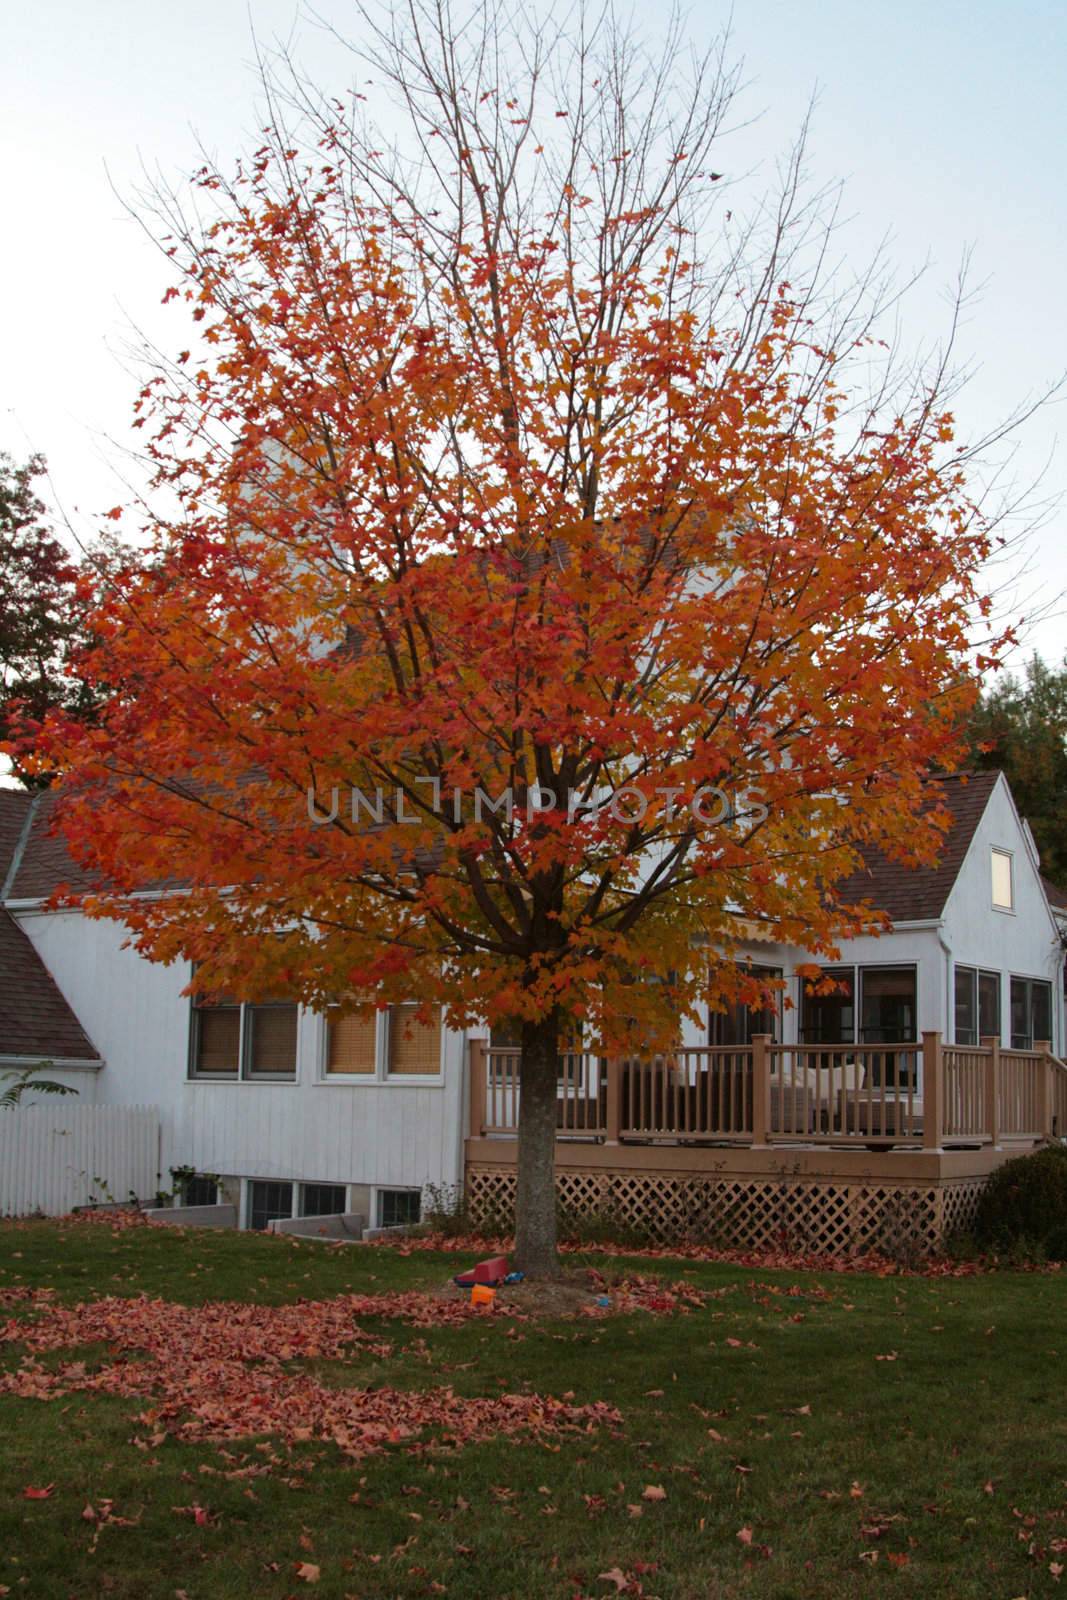 residential house in New York  area, fall season